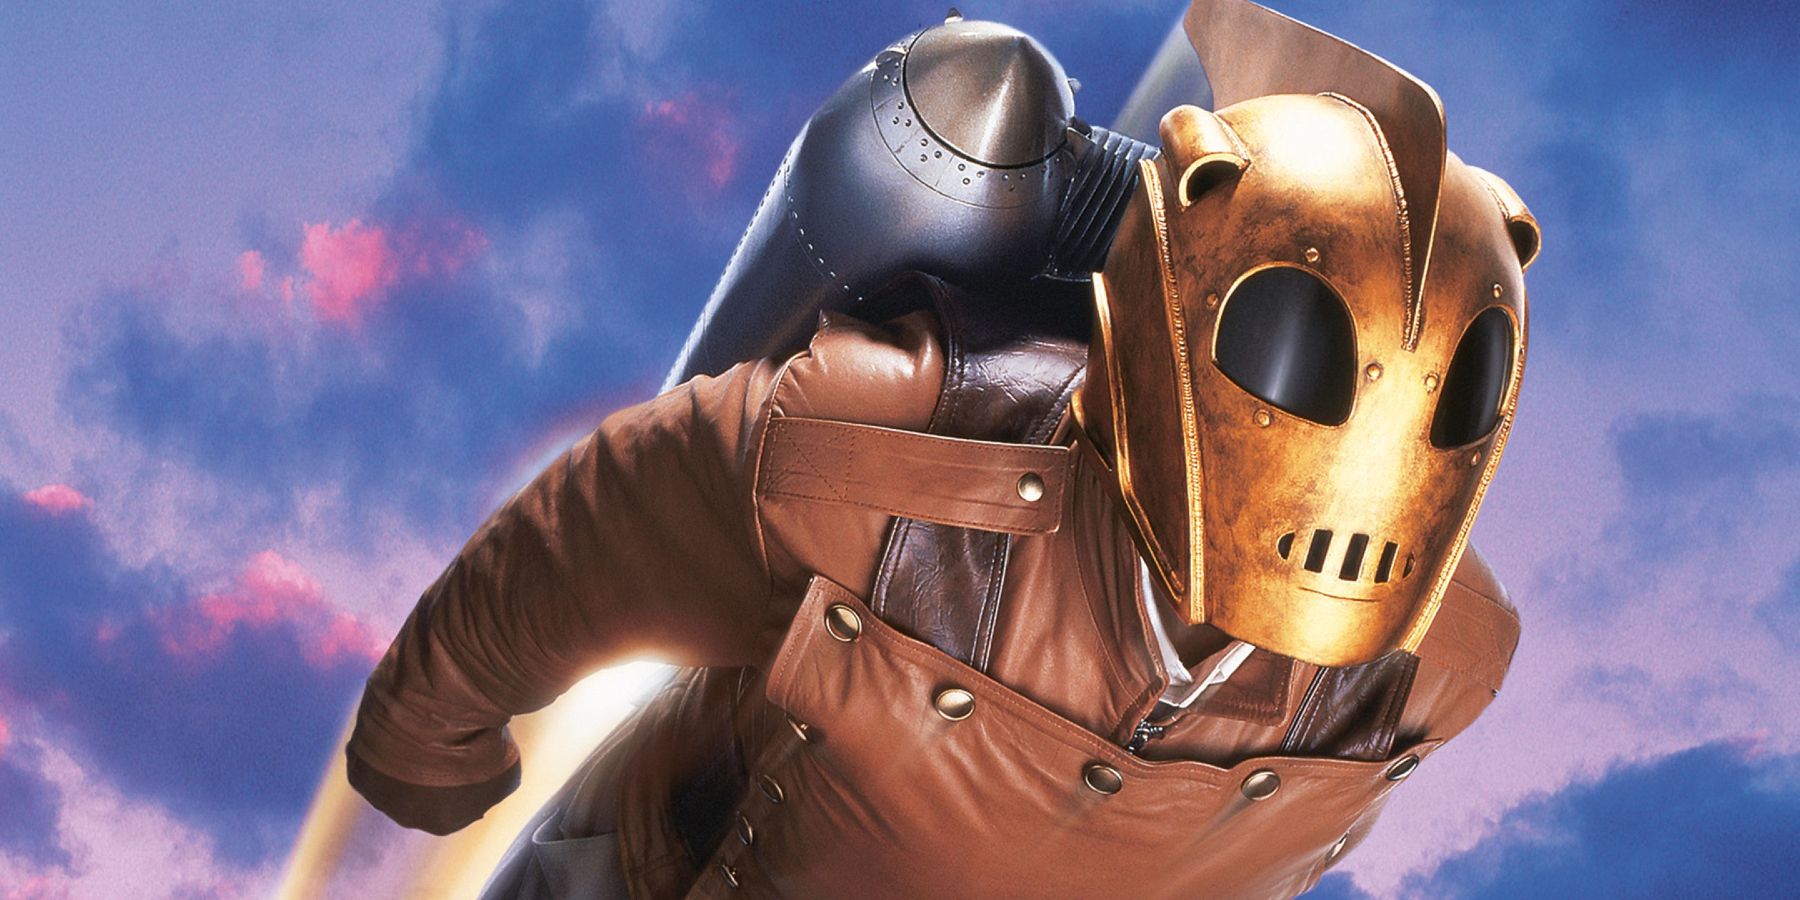 The Rocketeer flying across the sky in The Rocketeer